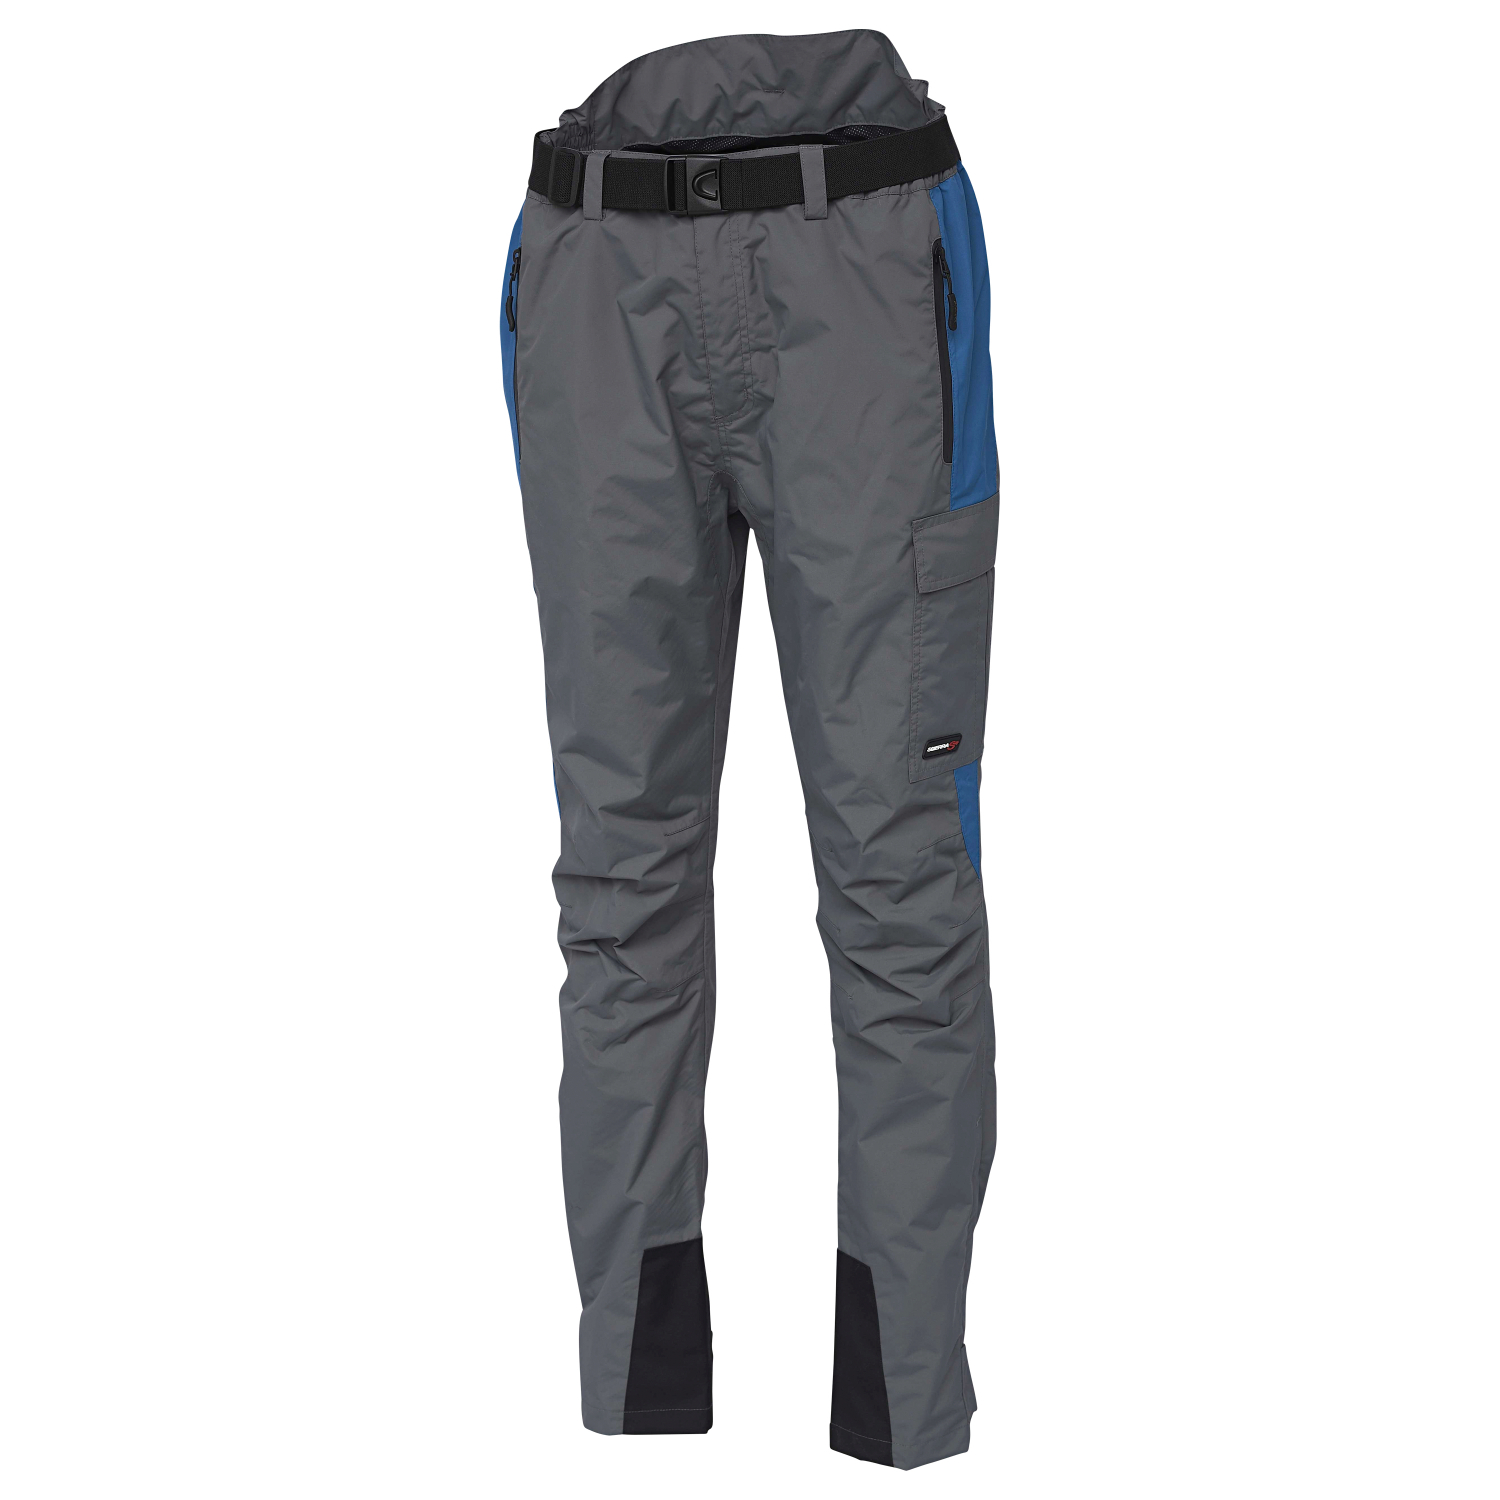 Mens Walking Trousers & Shorts | GO Outdoors